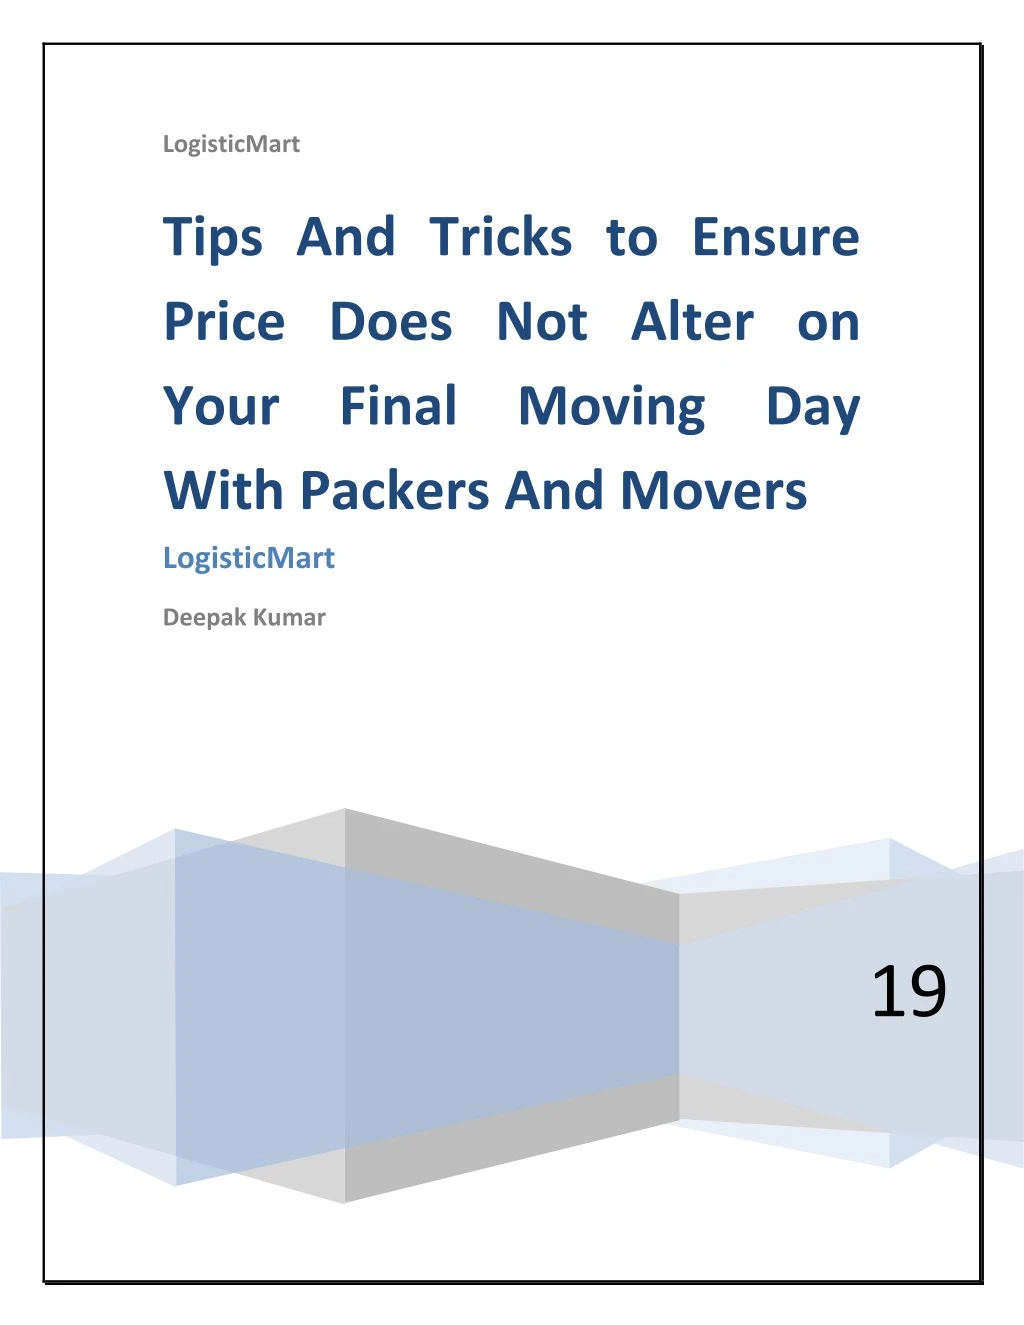 logisticmart tips and tricks to ensure price does